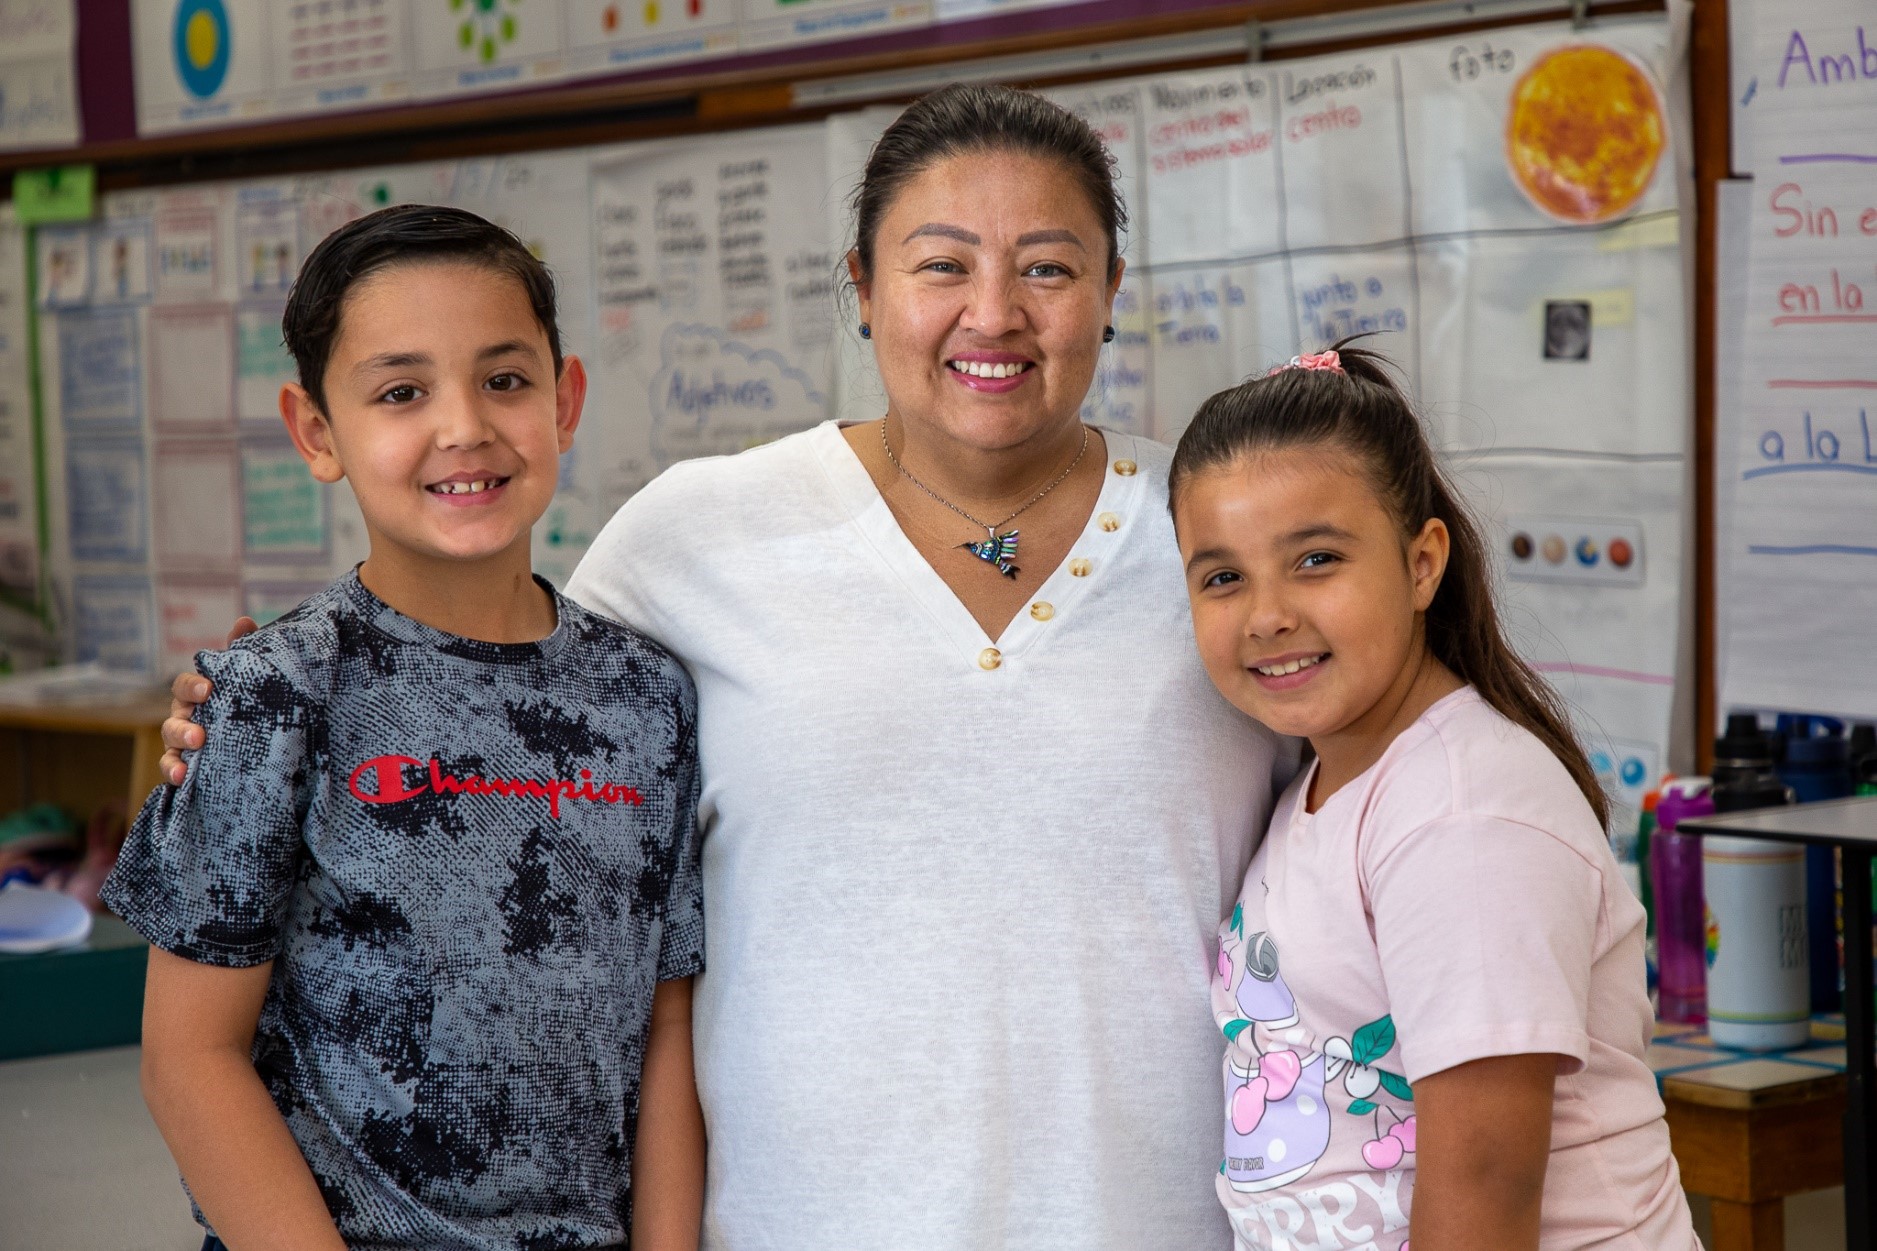 Mission View teacher Ms. Gomez-Peralta poses with two of her students